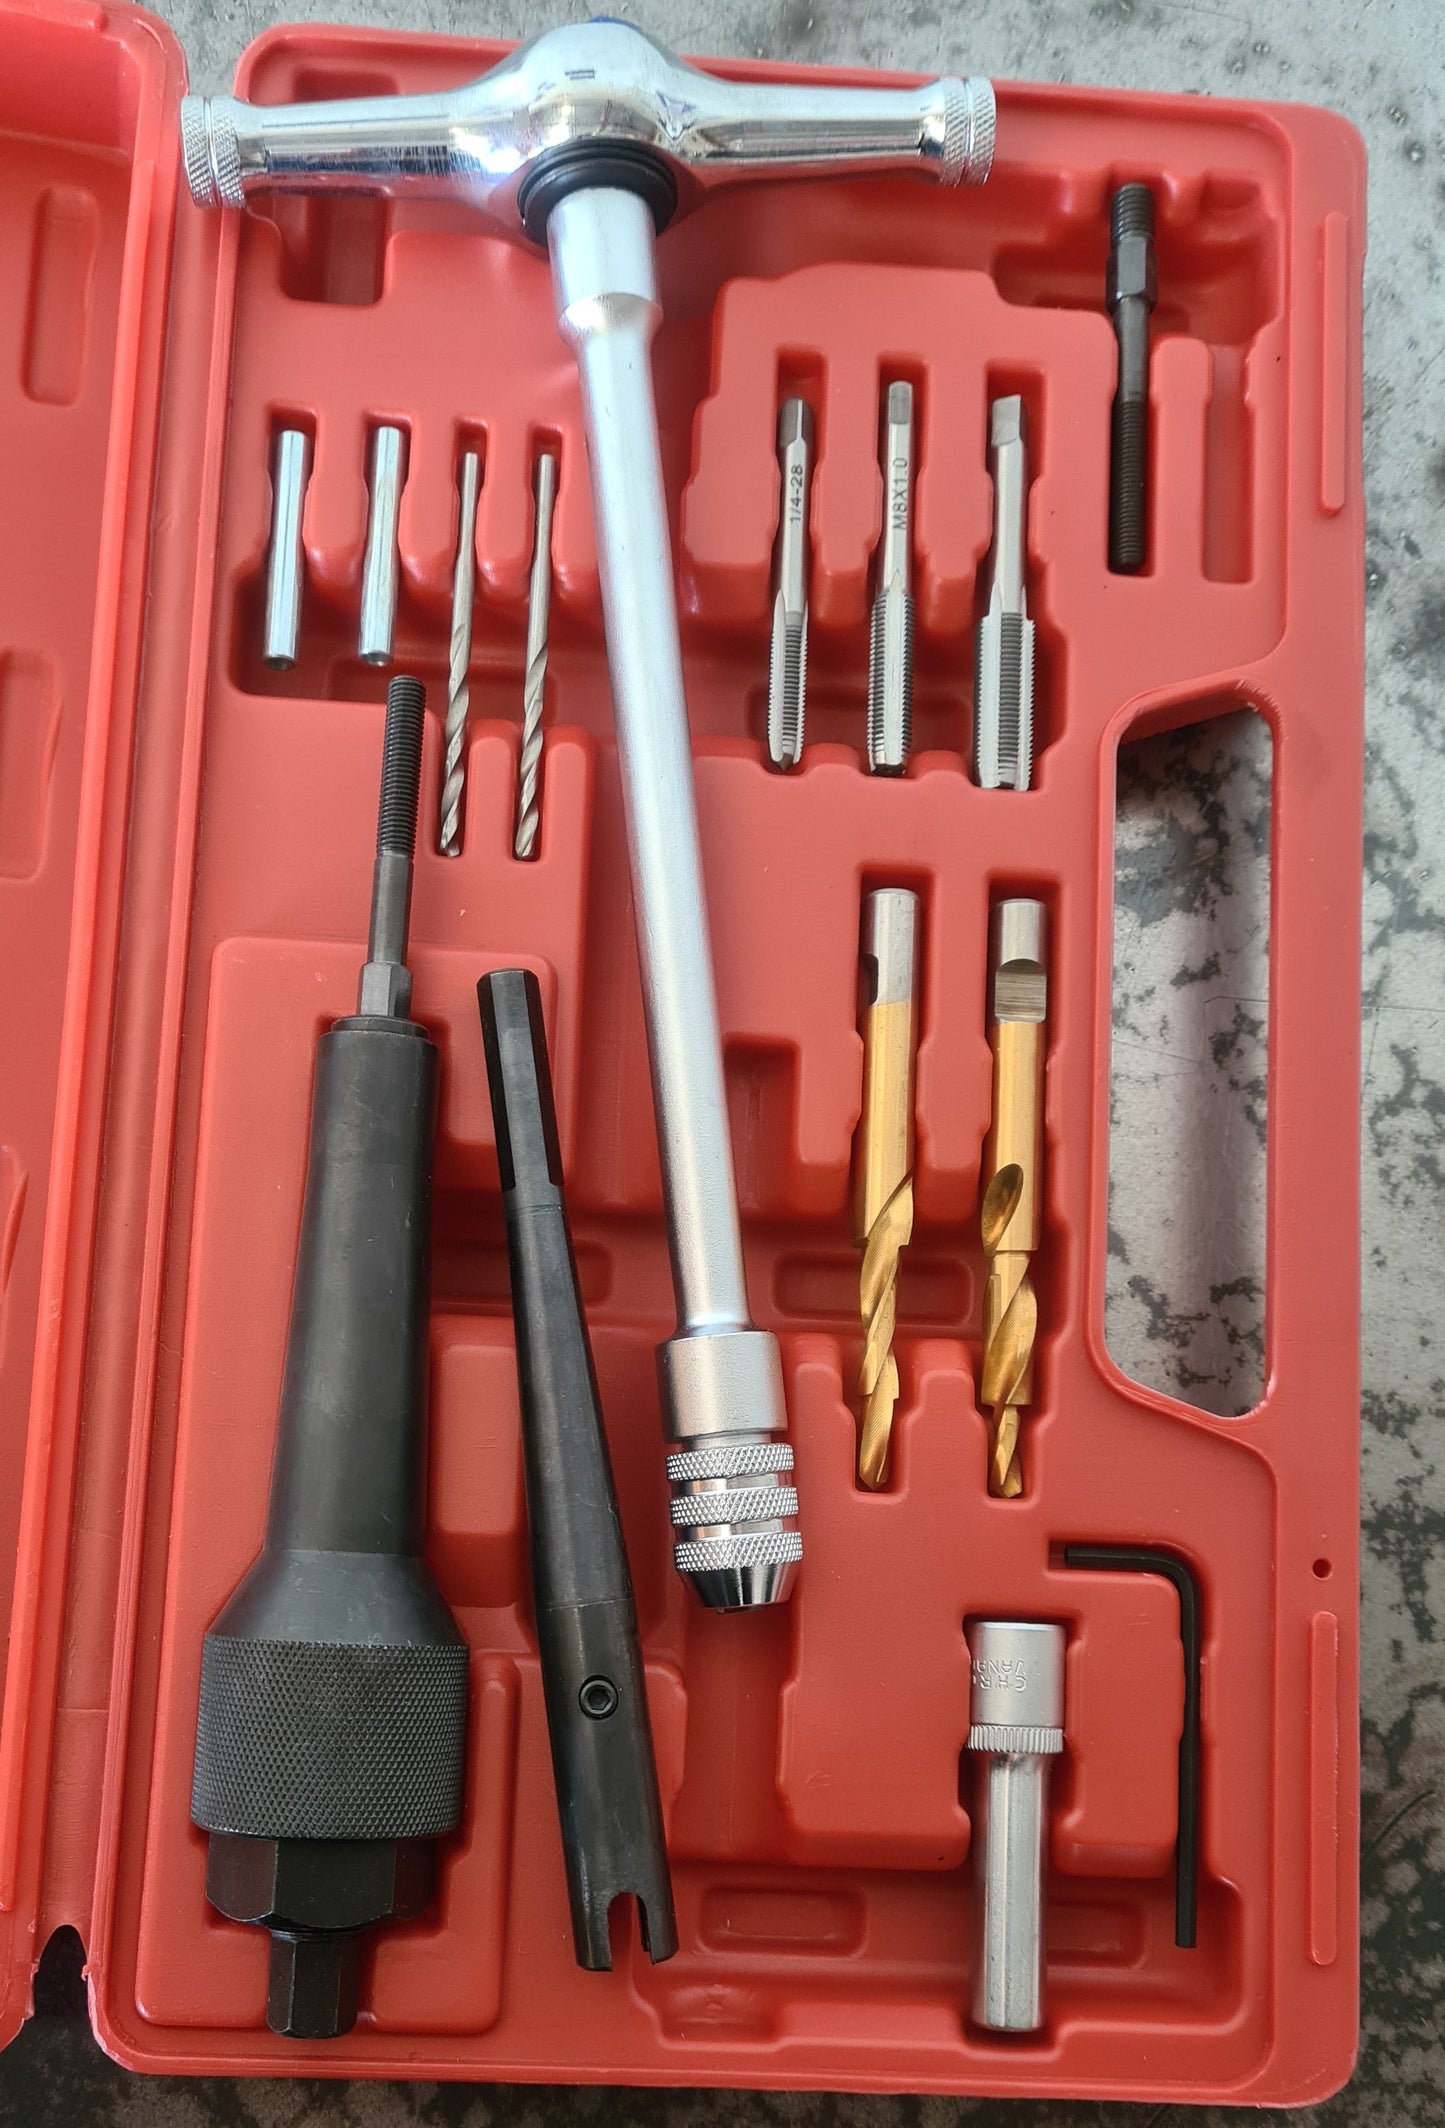 Comprehensive set includes all necessary adaptors, centring and thread cleaning tools to safely remove the damaged glow plug without damaging the cylinder head